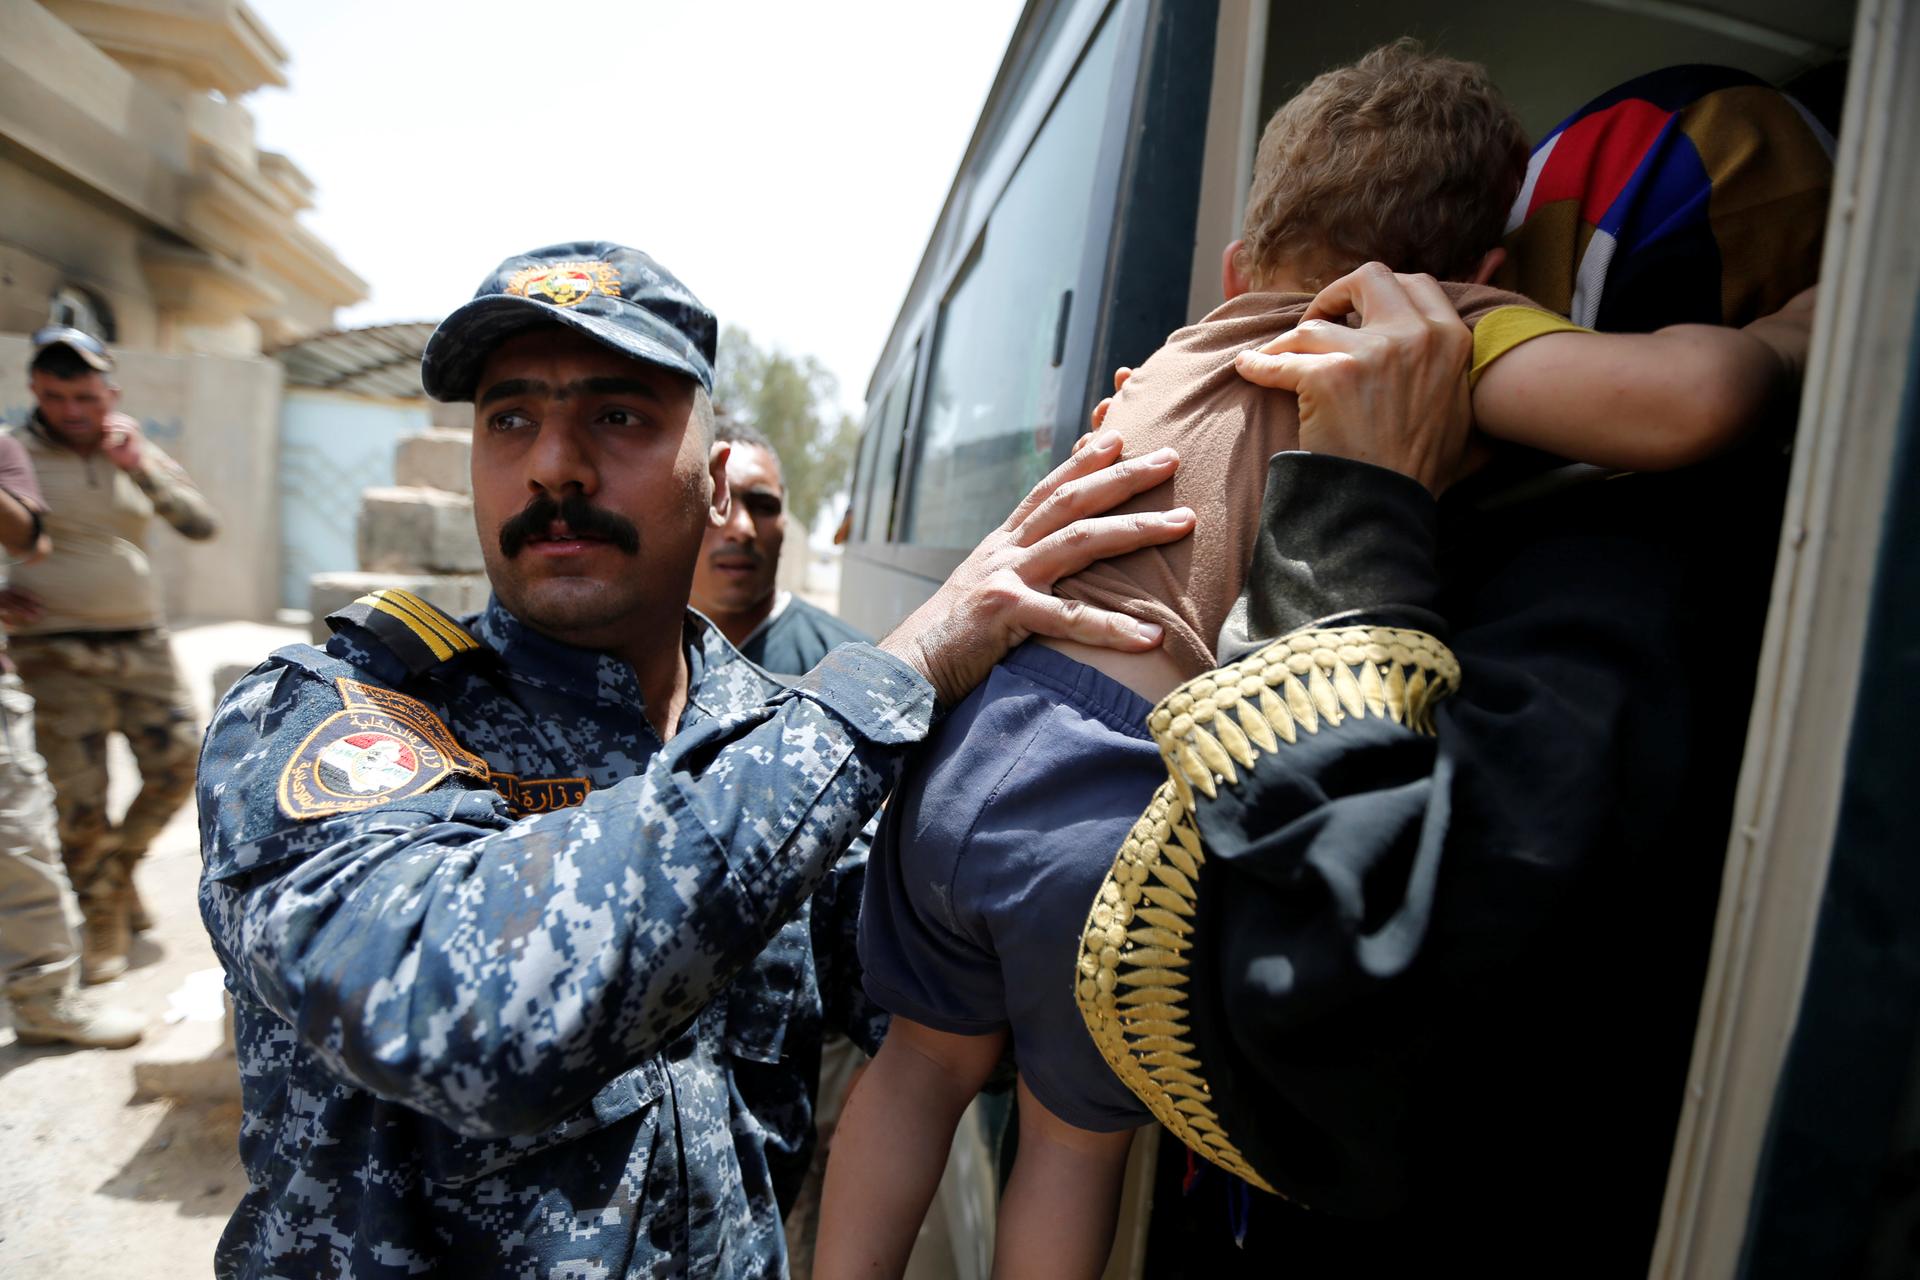 A member of the Iraqi security forces carries a child as he assists civilians, who had fled their homes due to clashes, at Camp Tariq, south of Fallujah, Iraq, June 4, 2016.